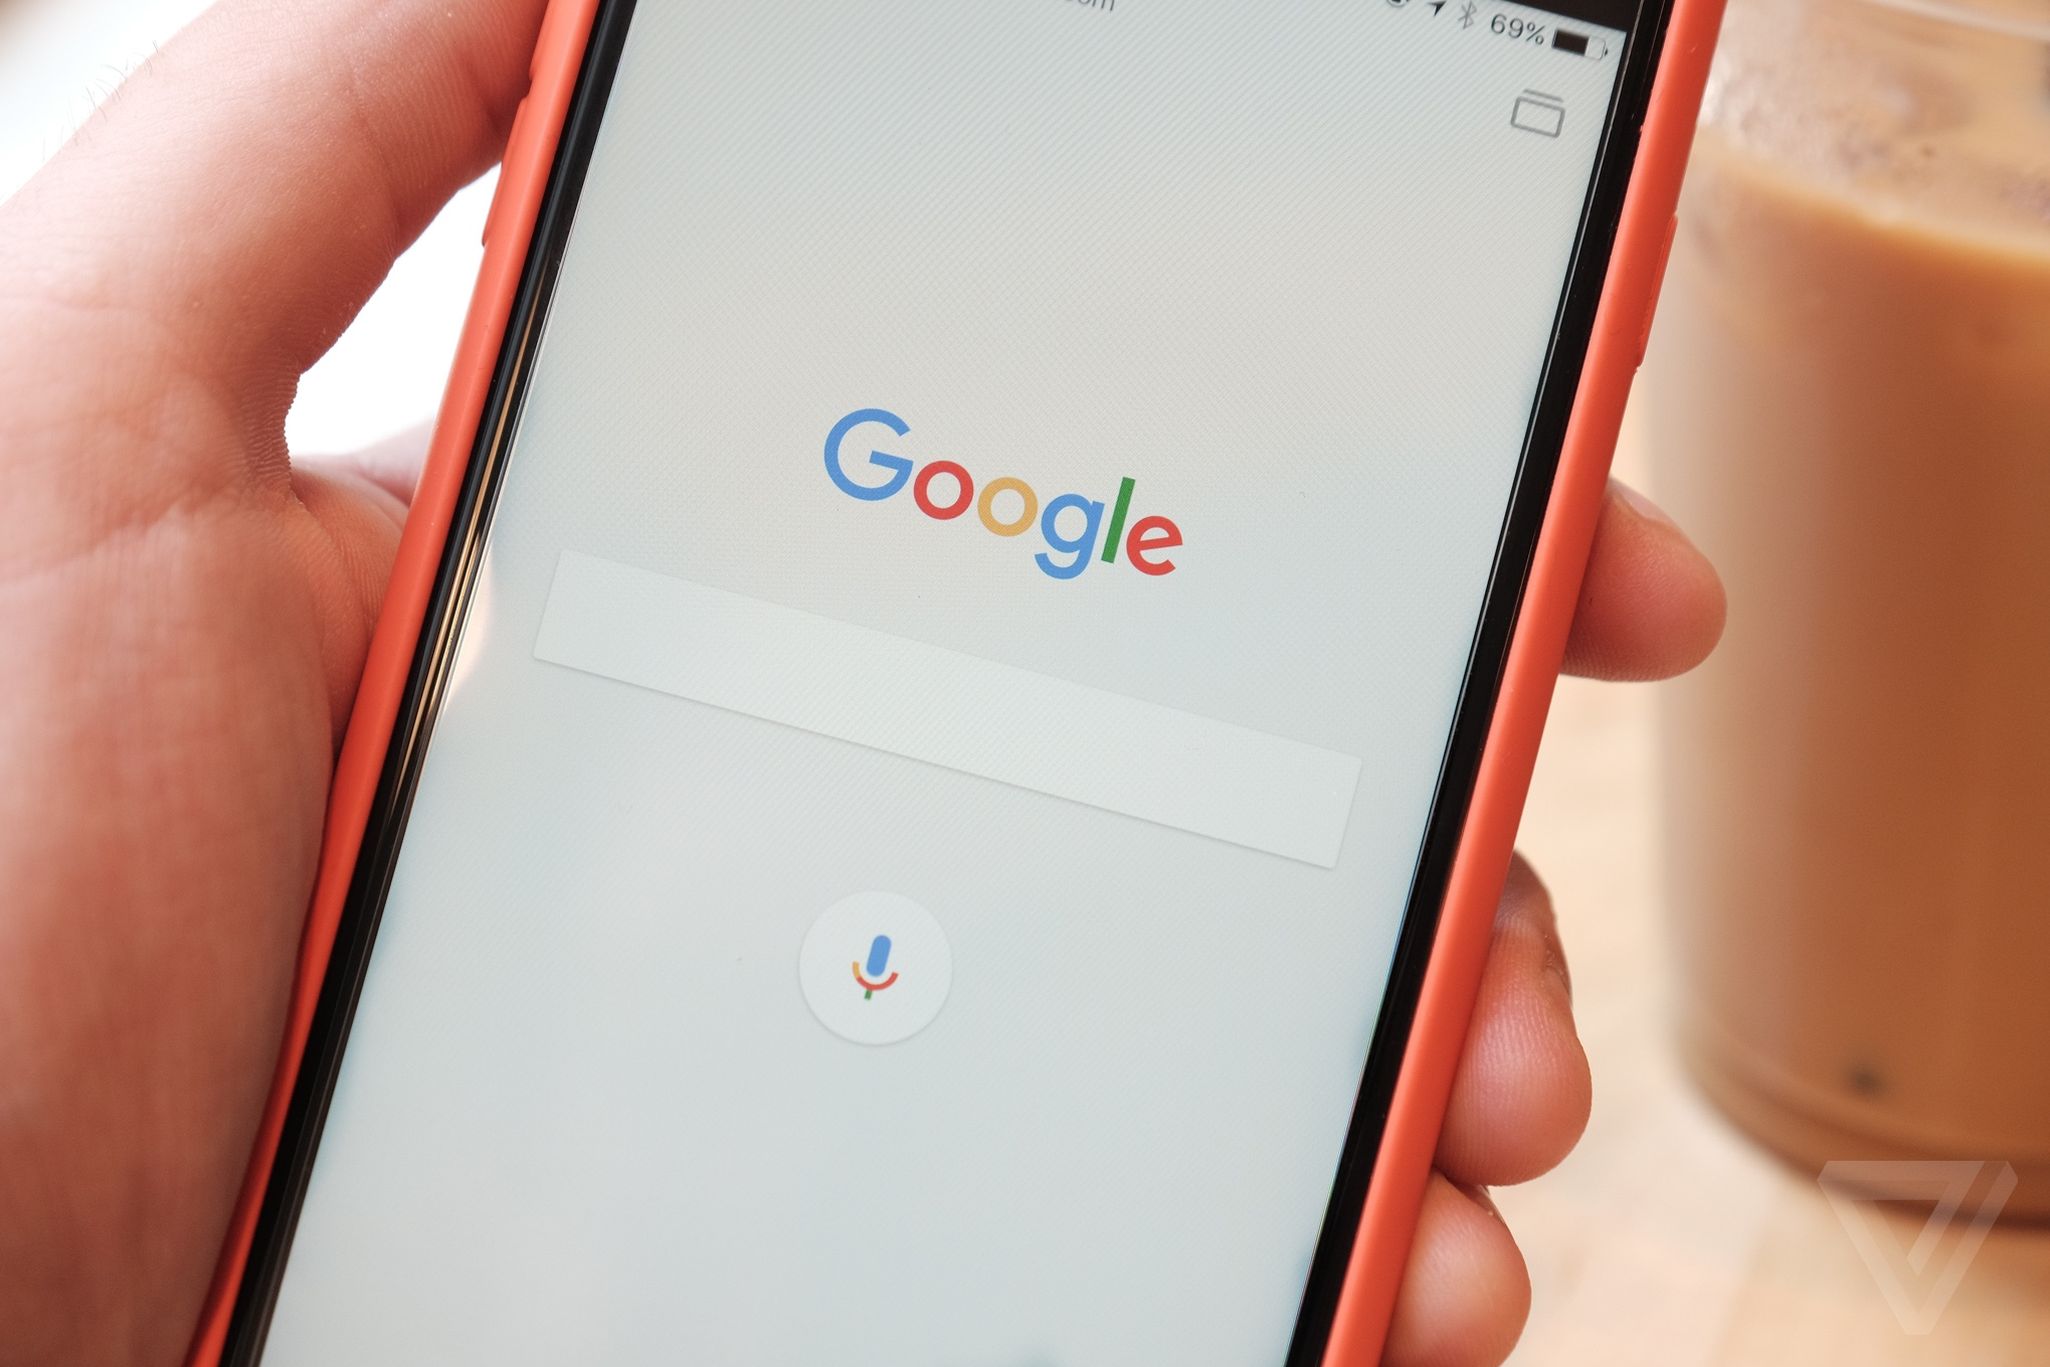 Google Looks For Ways To Improve Voice Recognition